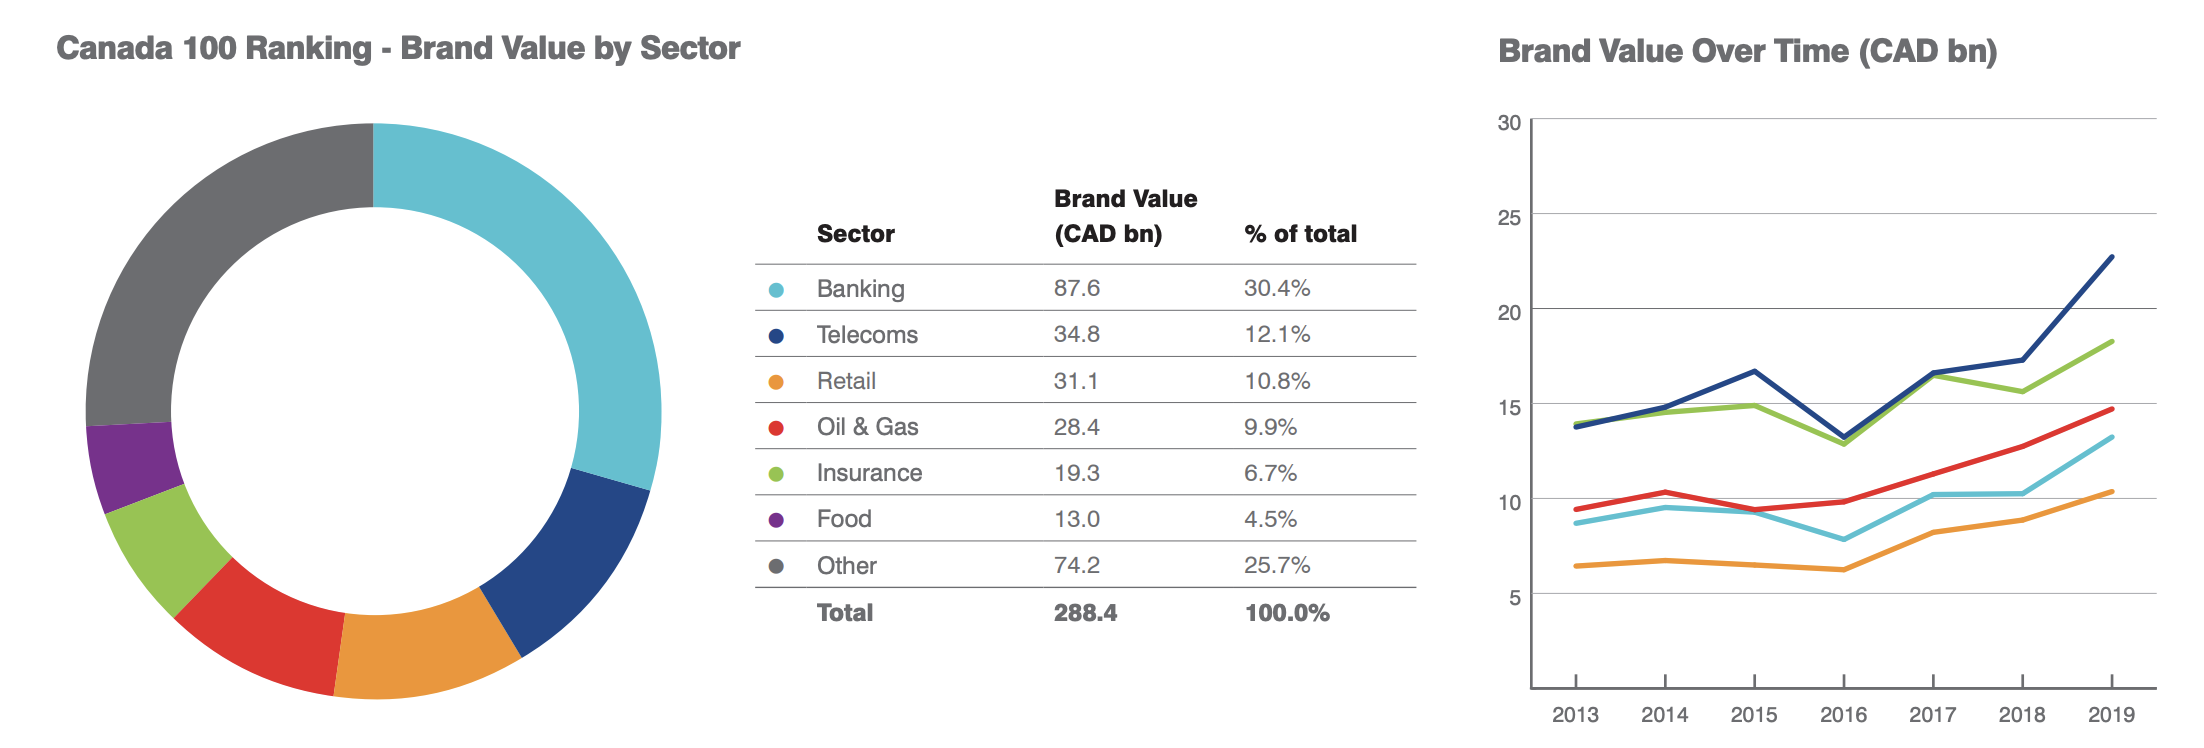 Charts from Brand Finance's 2019 report that shows Brand Value by Sector and Over Time